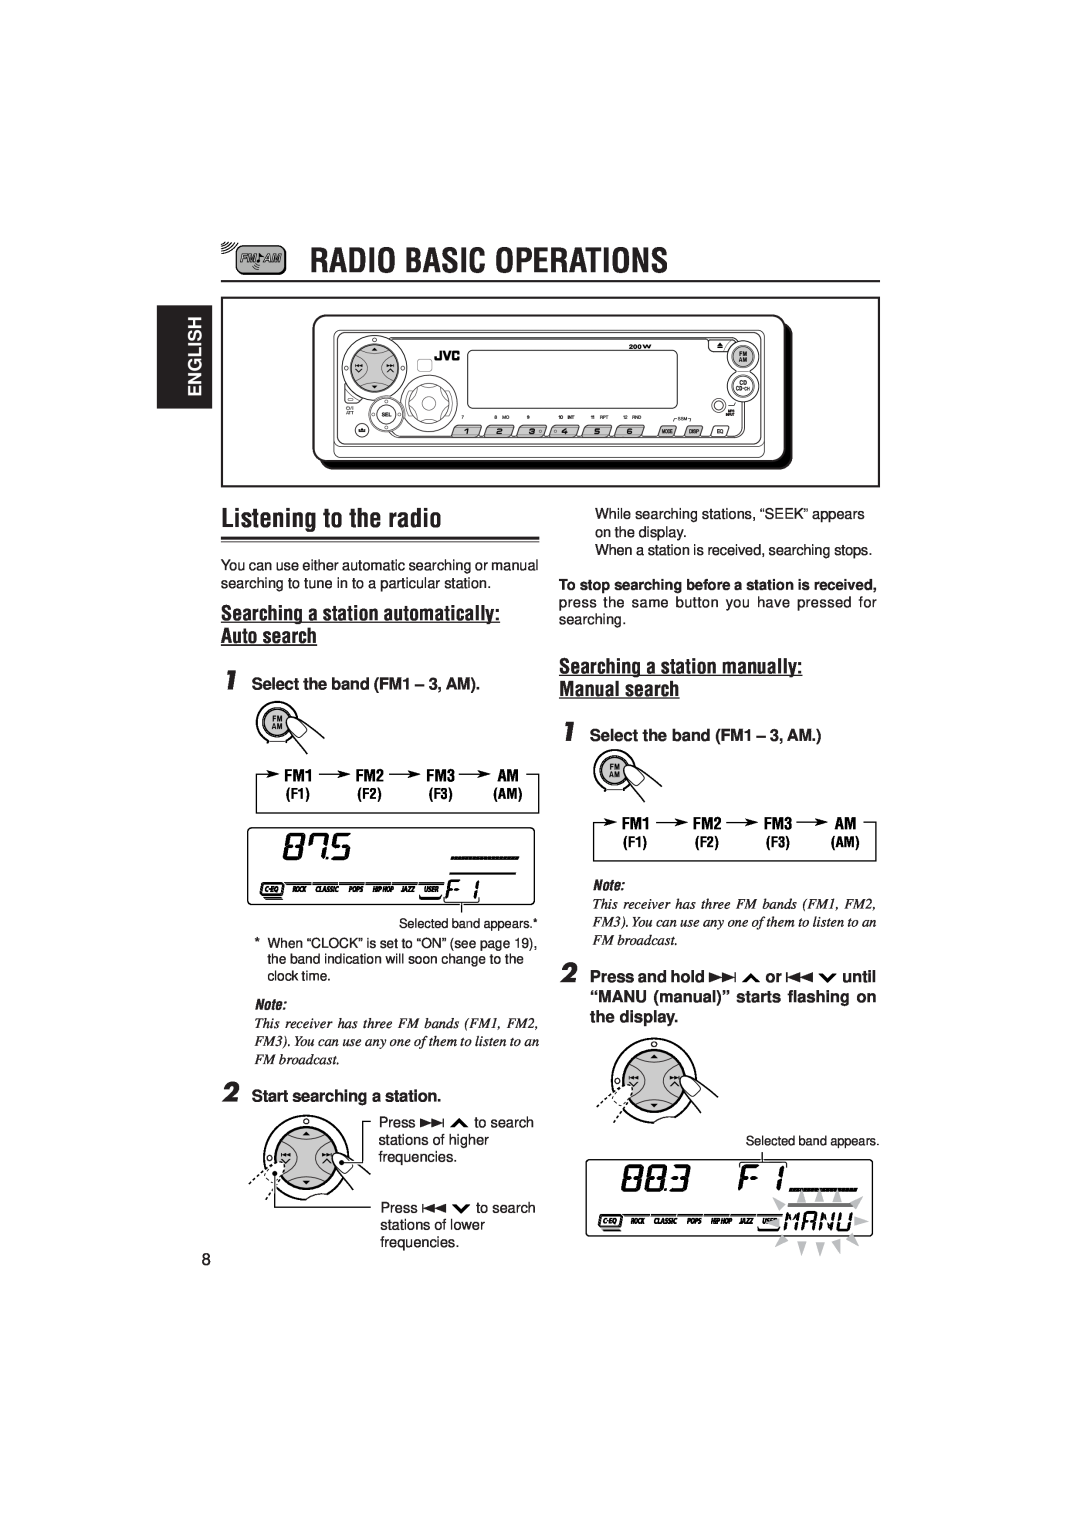 JVC KD-SX8250 manual Radio Basic Operations, Listening to the radio, Searching a station automatically Auto search, English 